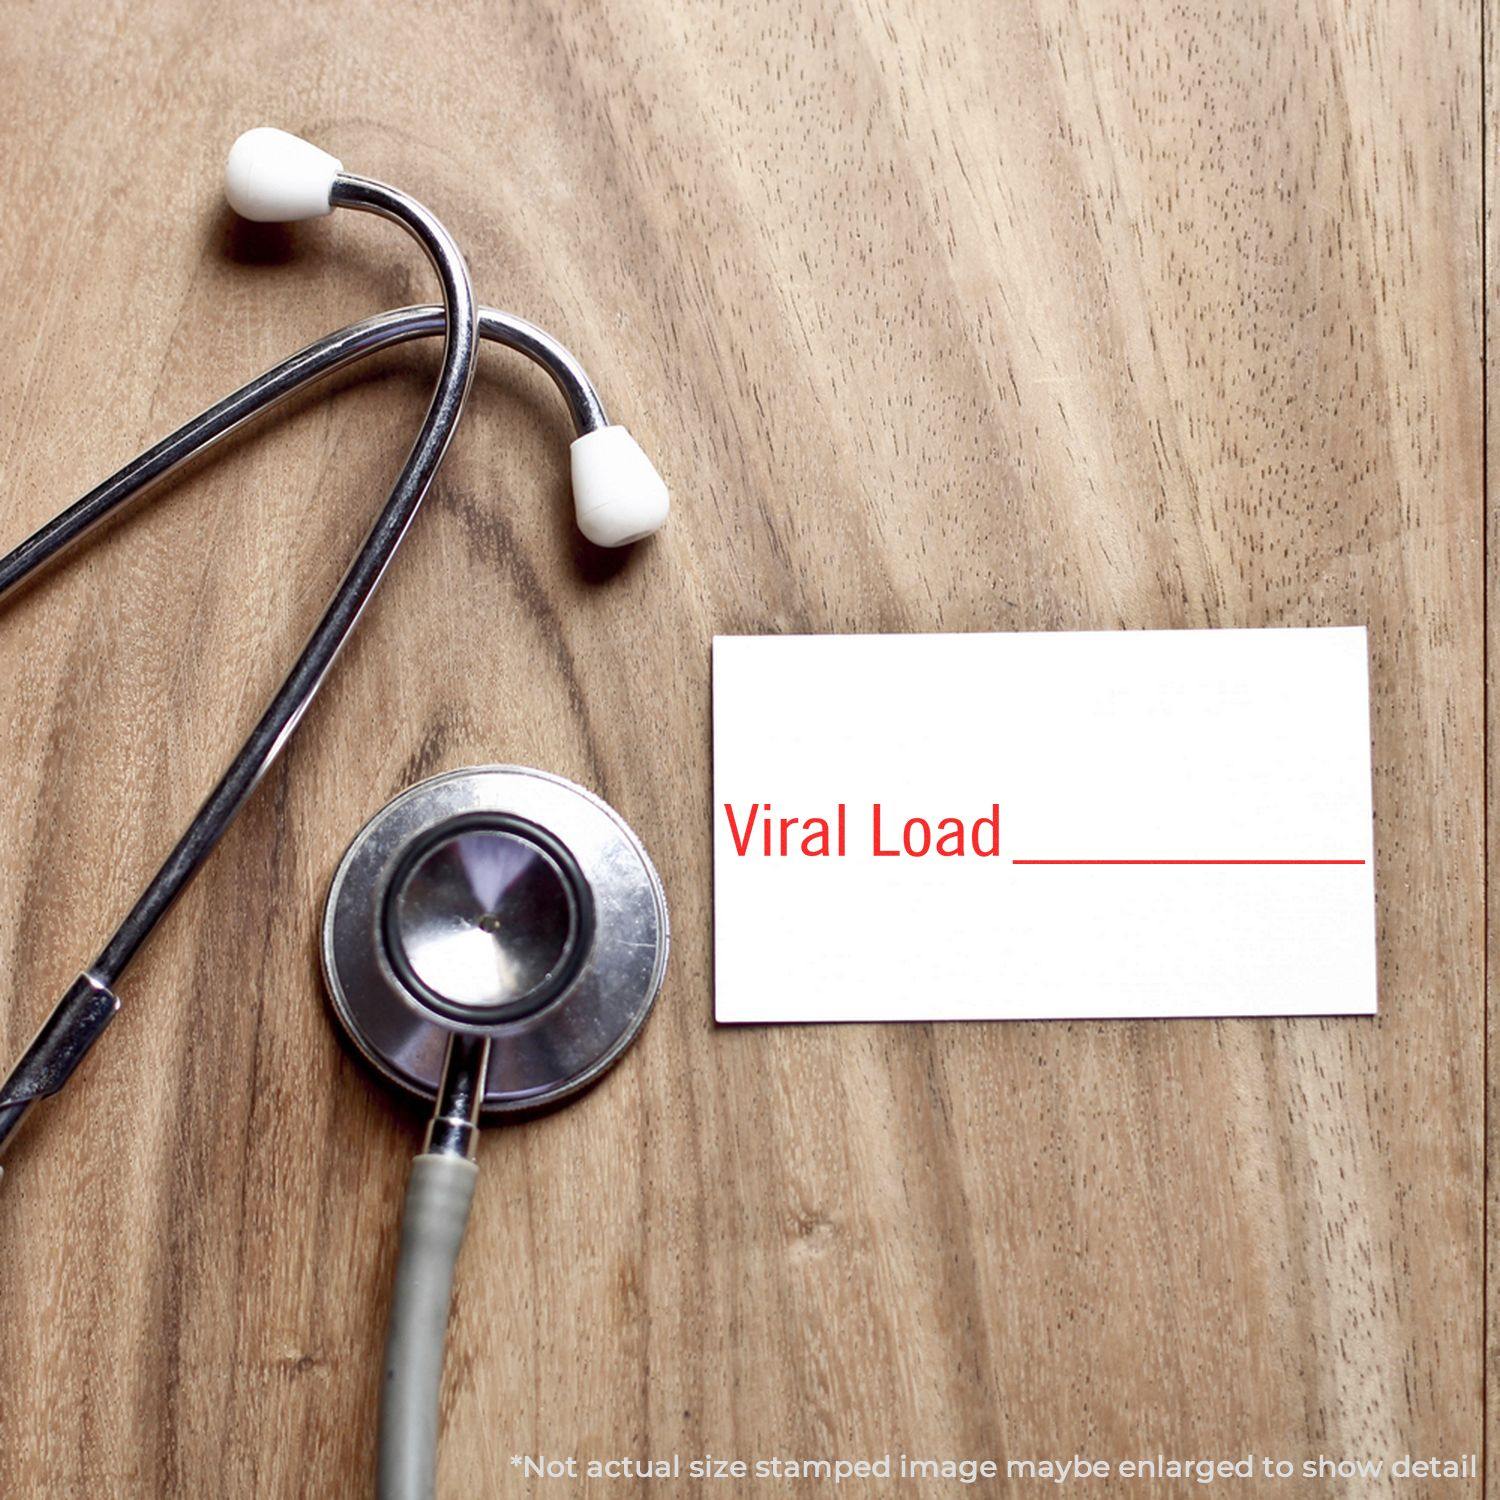 A stock office rubber stamp with a stamped image showing how the text "Viral Load" with a line is displayed after stamping.